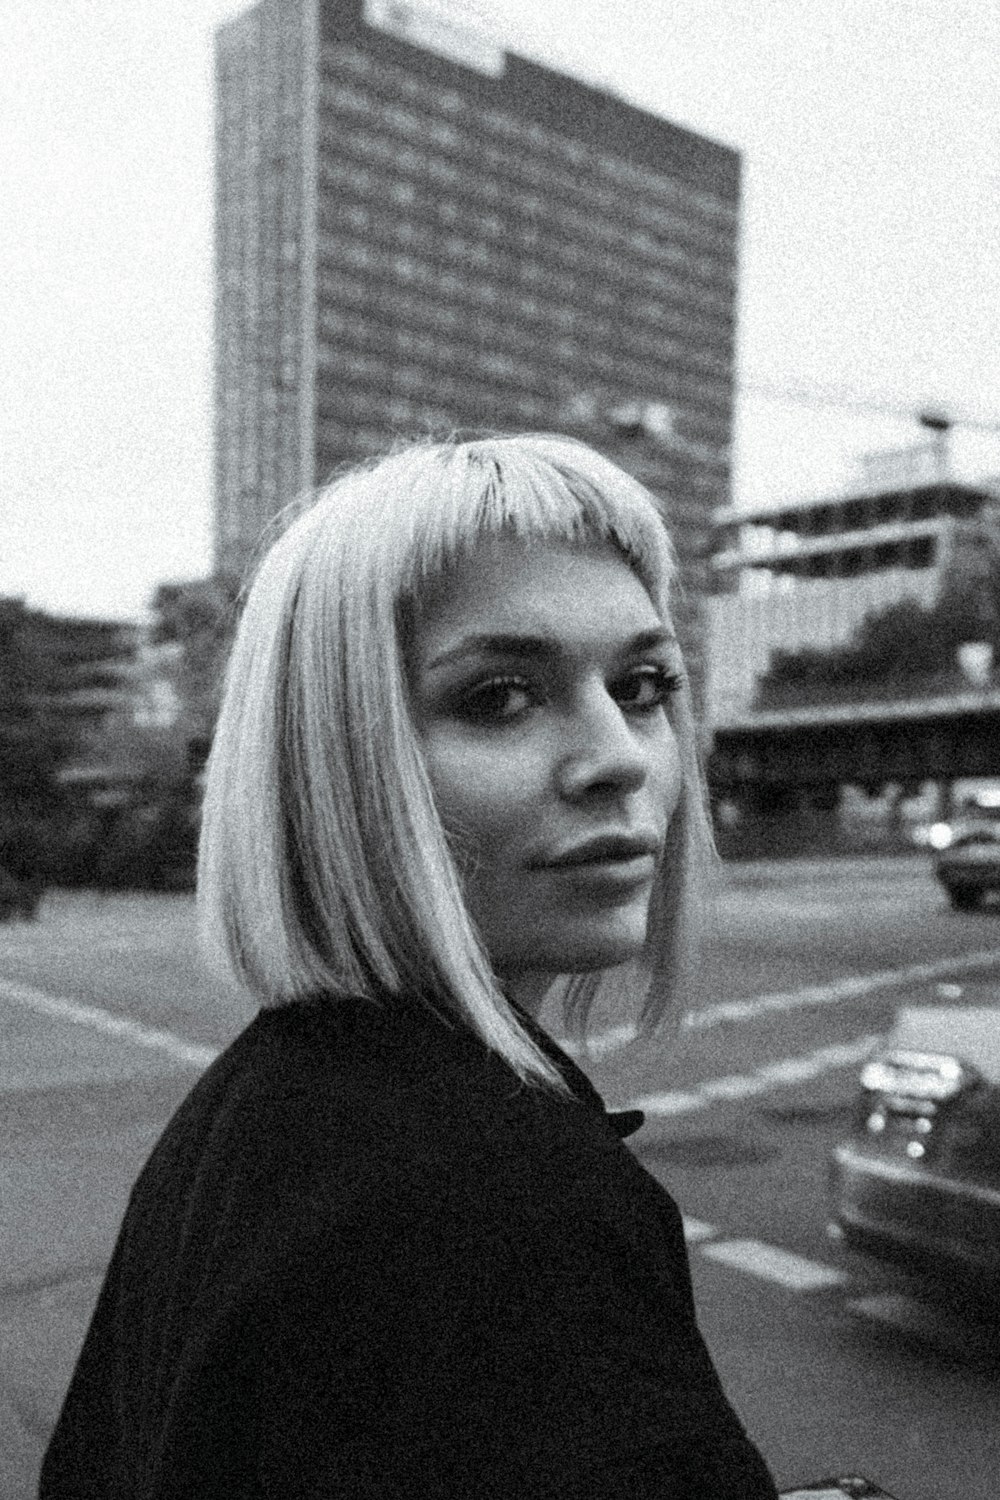 a black and white photo of a woman on a city street